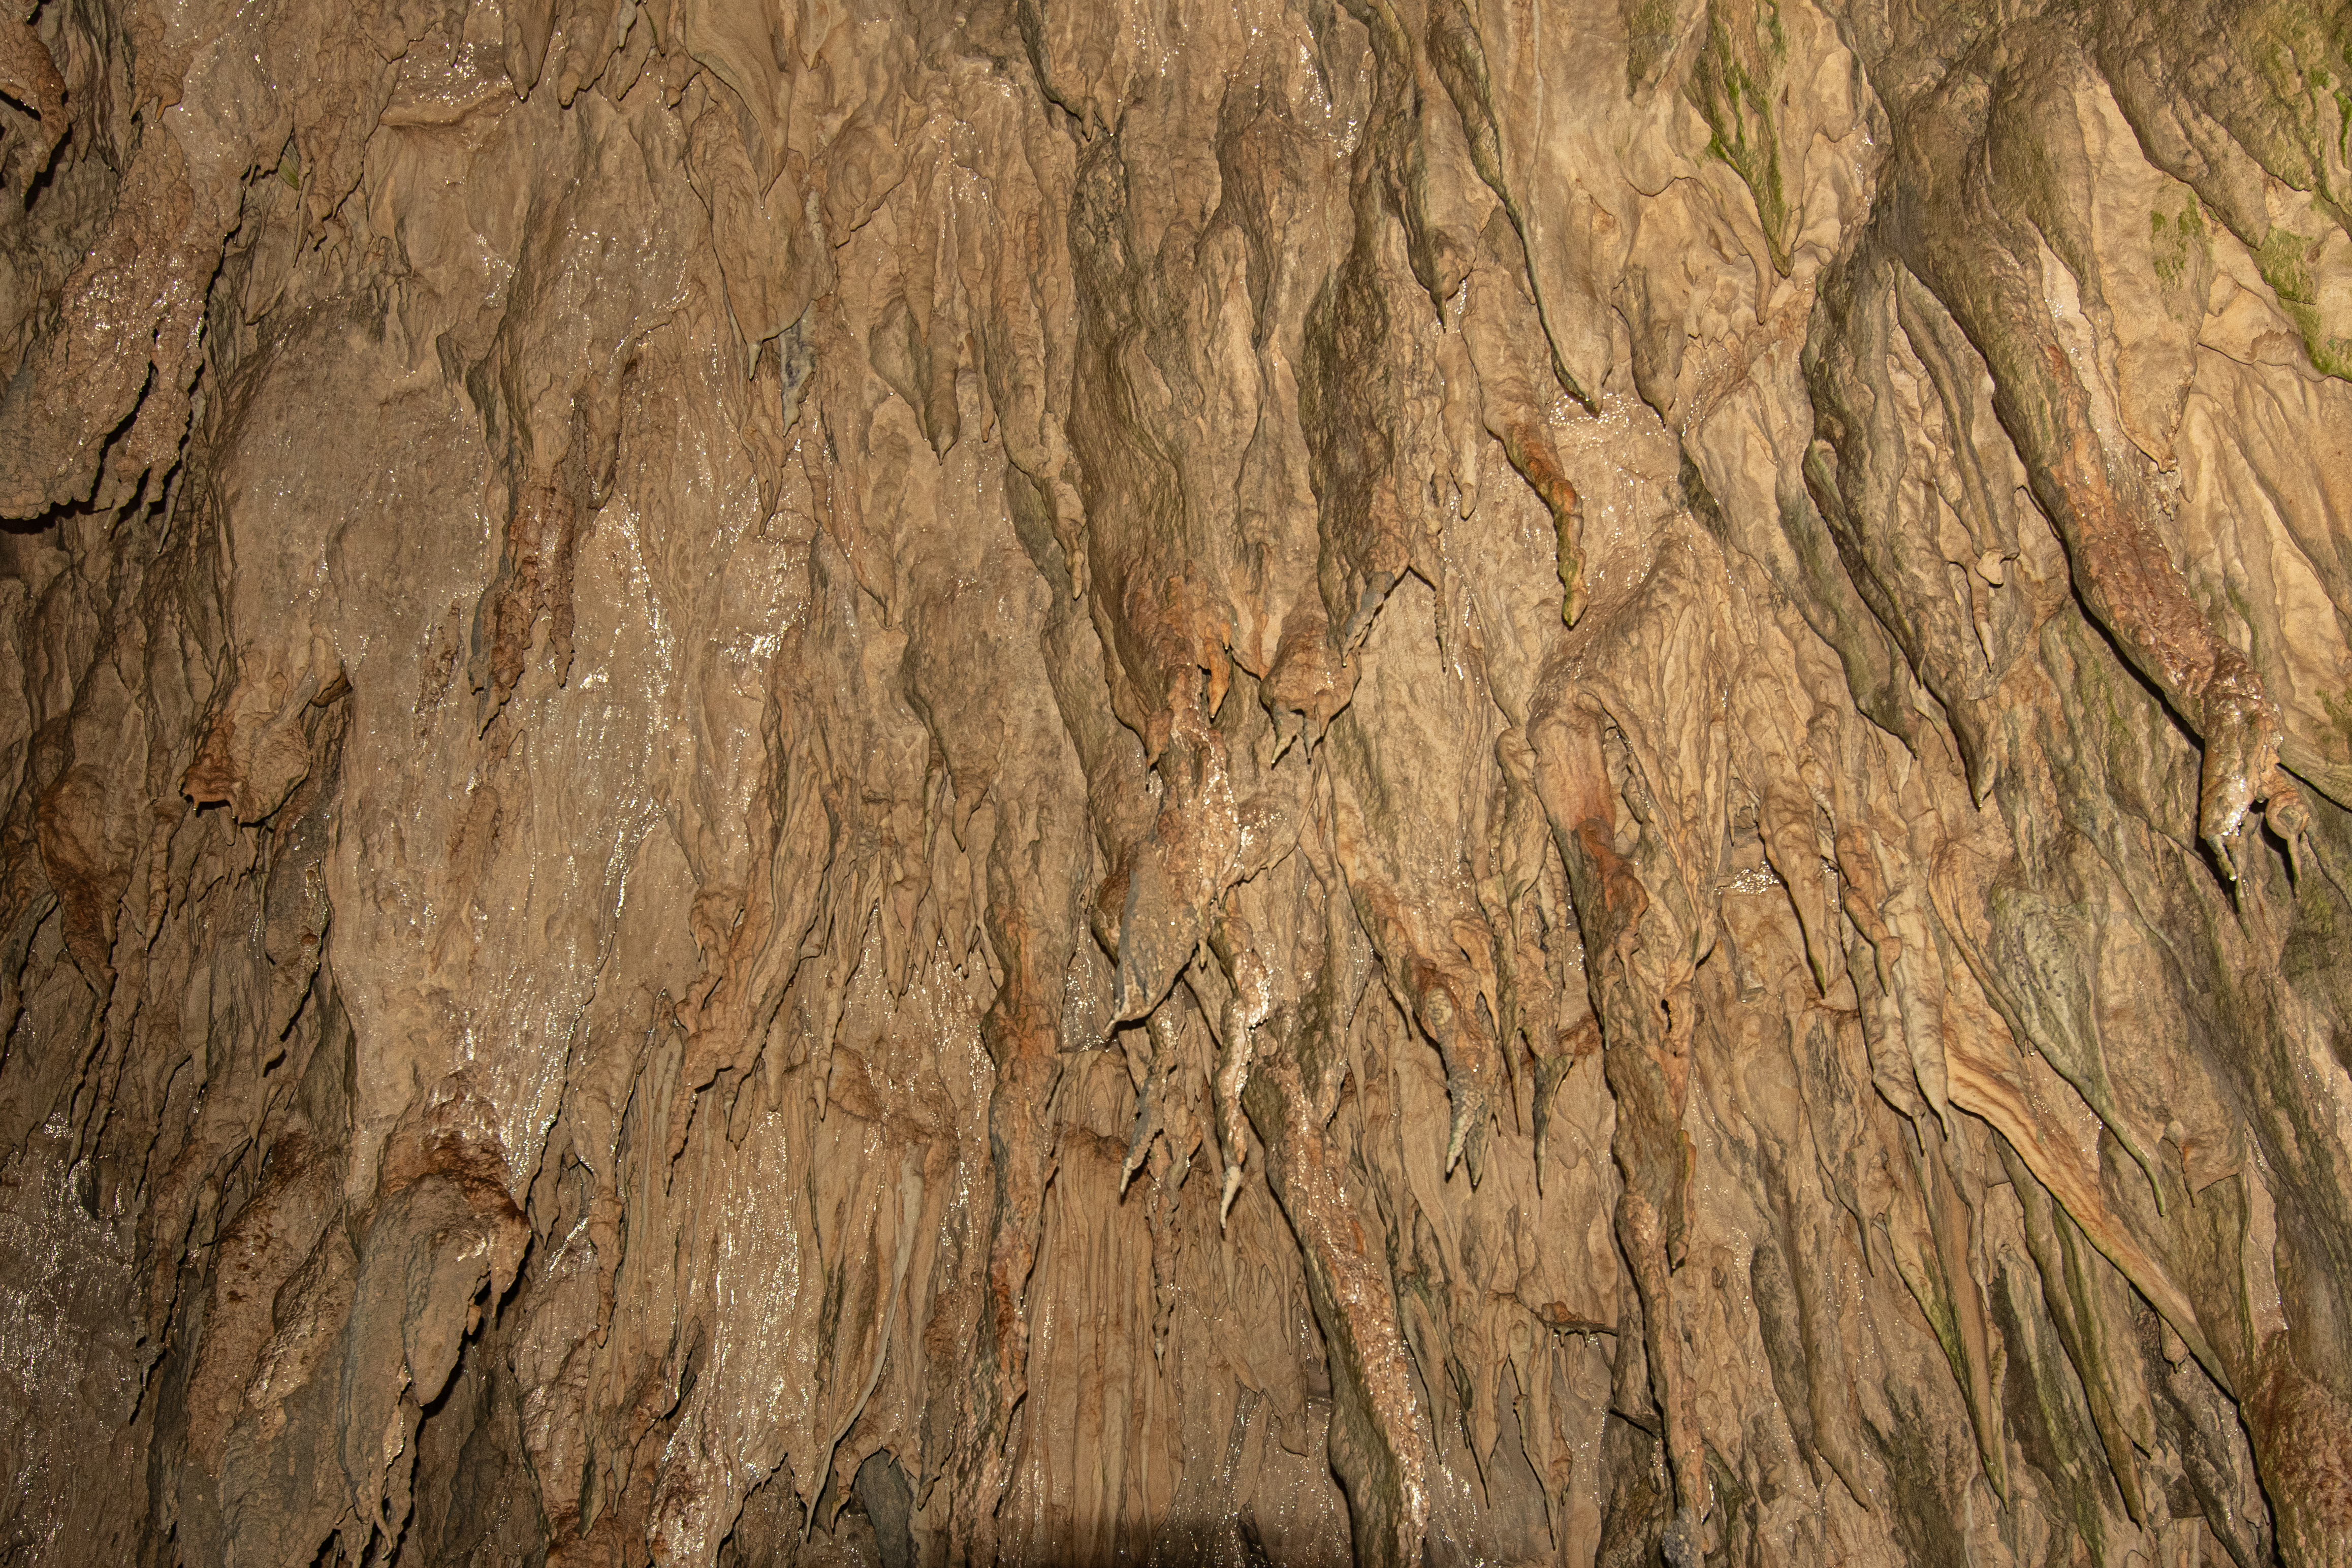 Stalactites with have abnormal growth